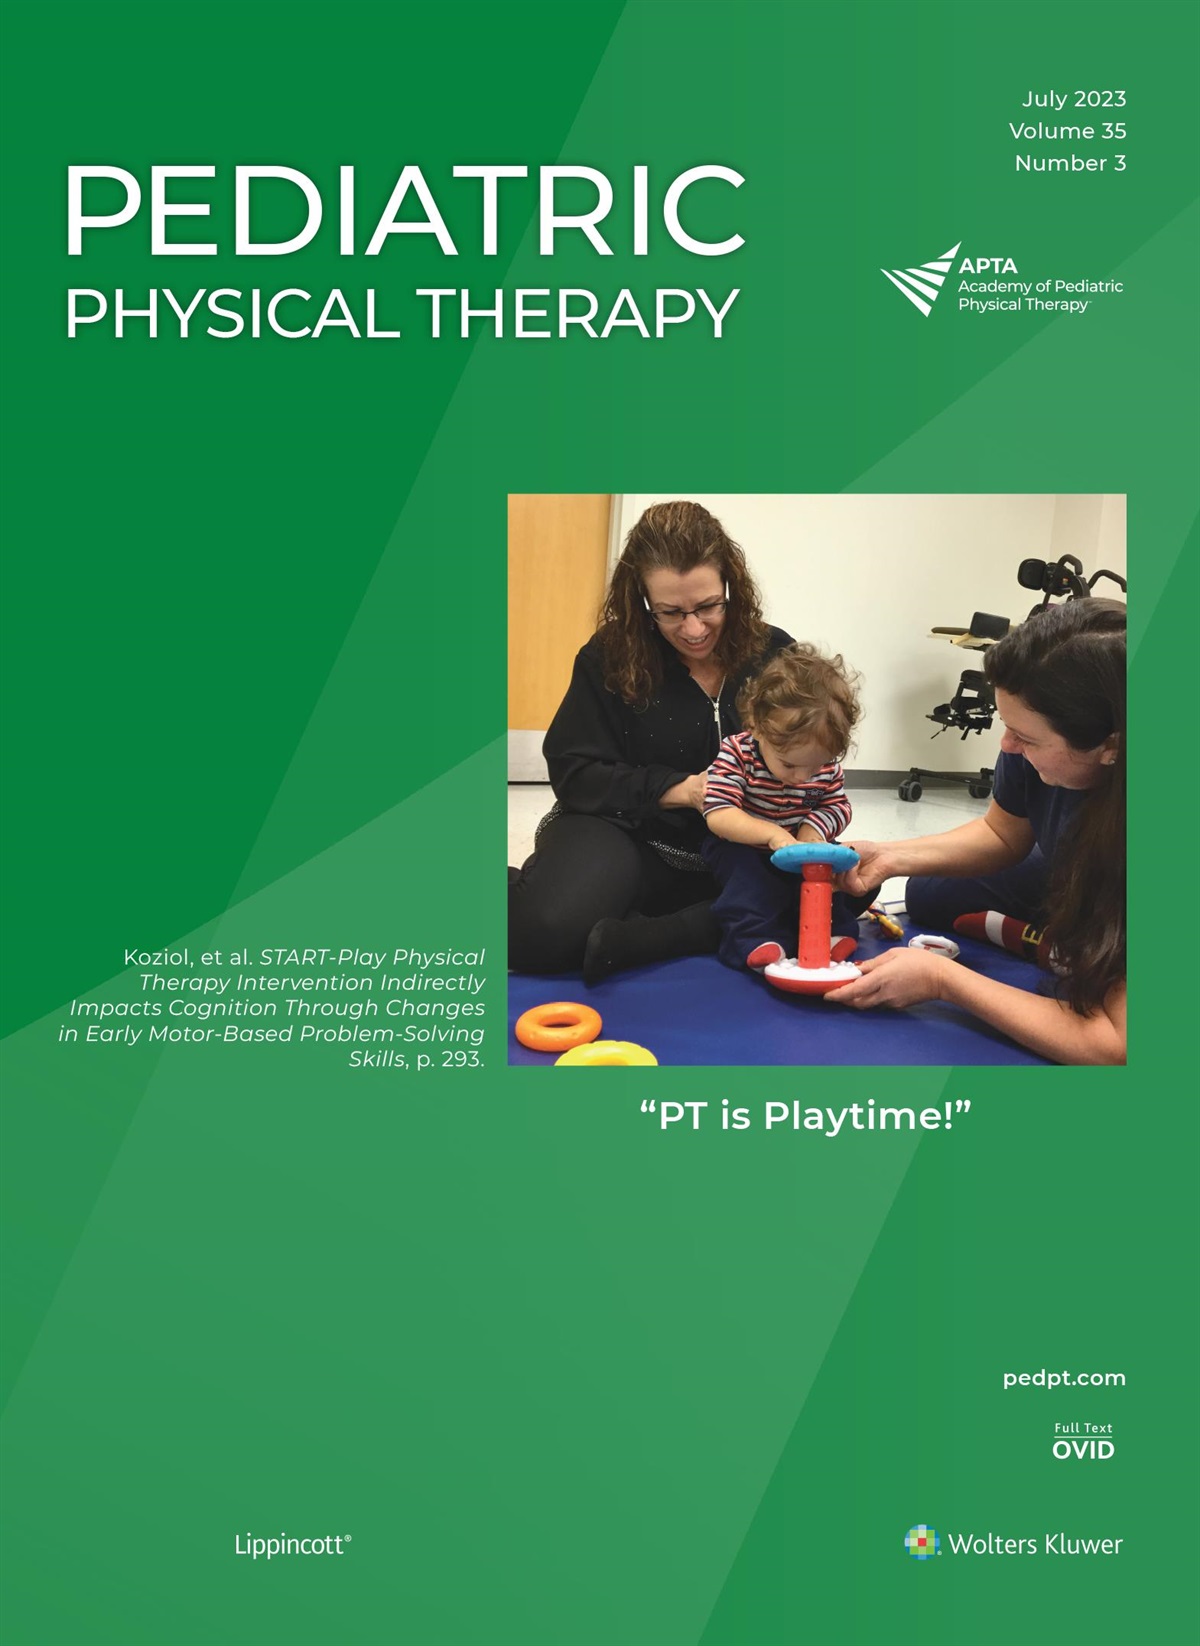 Commentary on “START-Play Physical Therapy Intervention Indirectly Impacts Cognition Through Changes in Early Motor-Based Problem-Solving Skills”